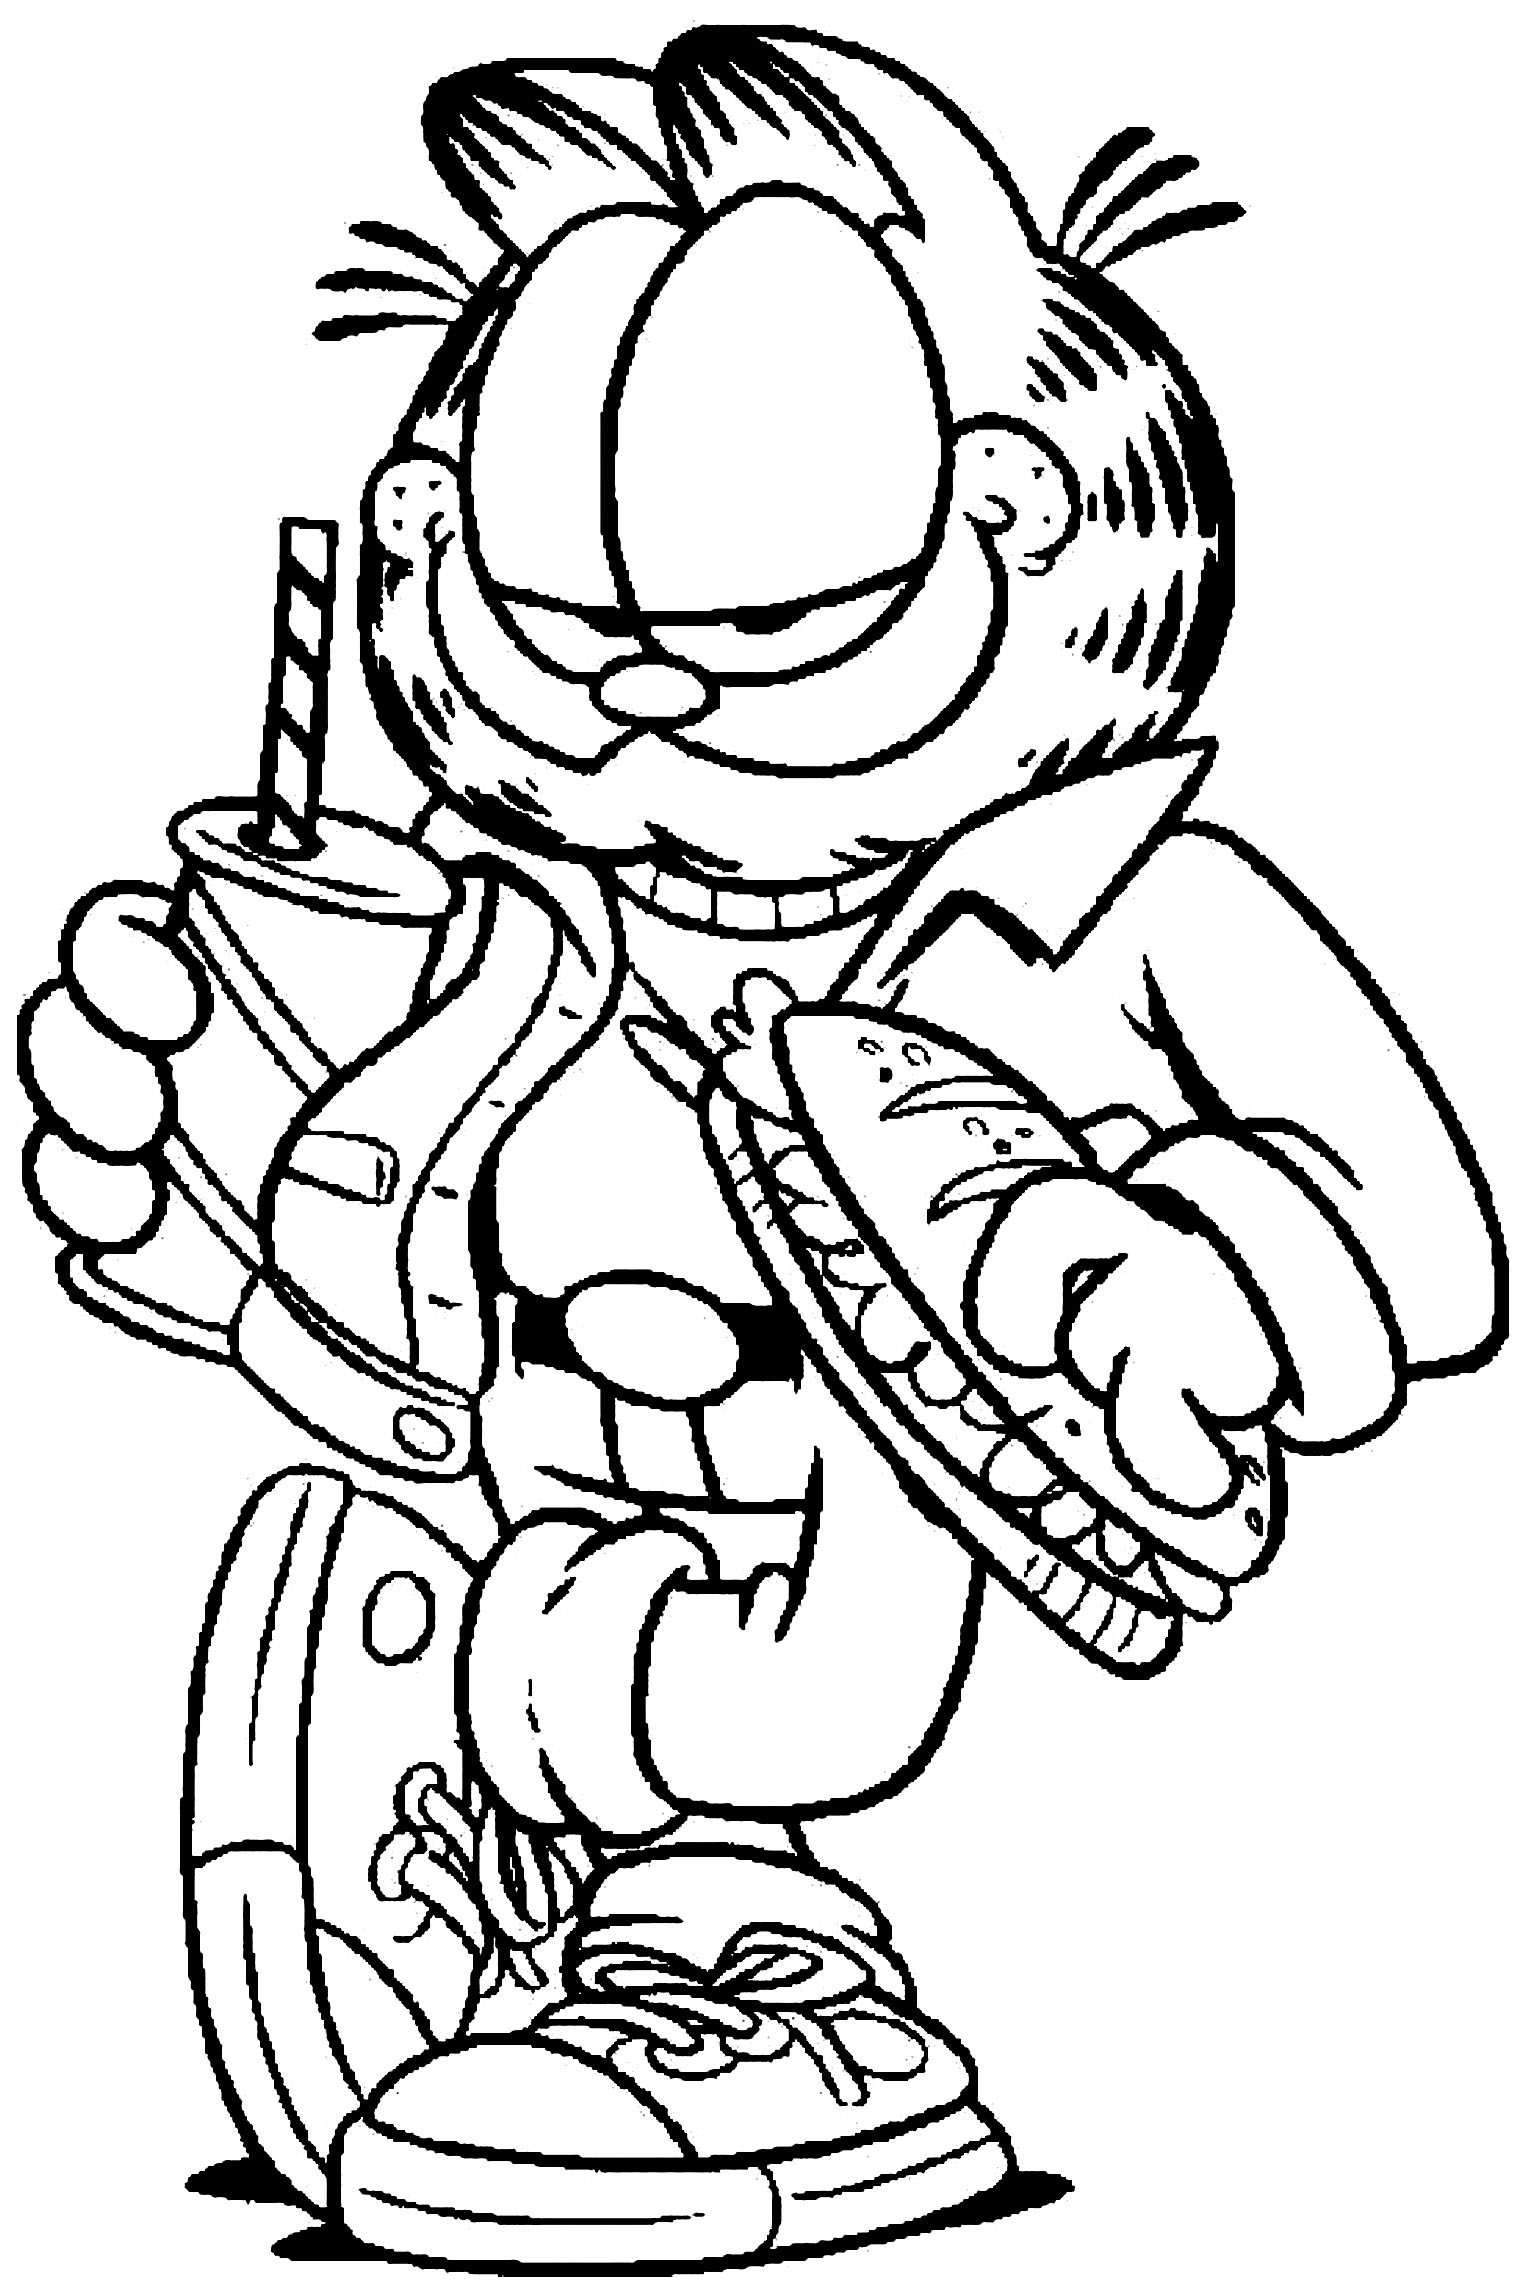 Garfield Kids Coloring Pages - SheetalColor.com